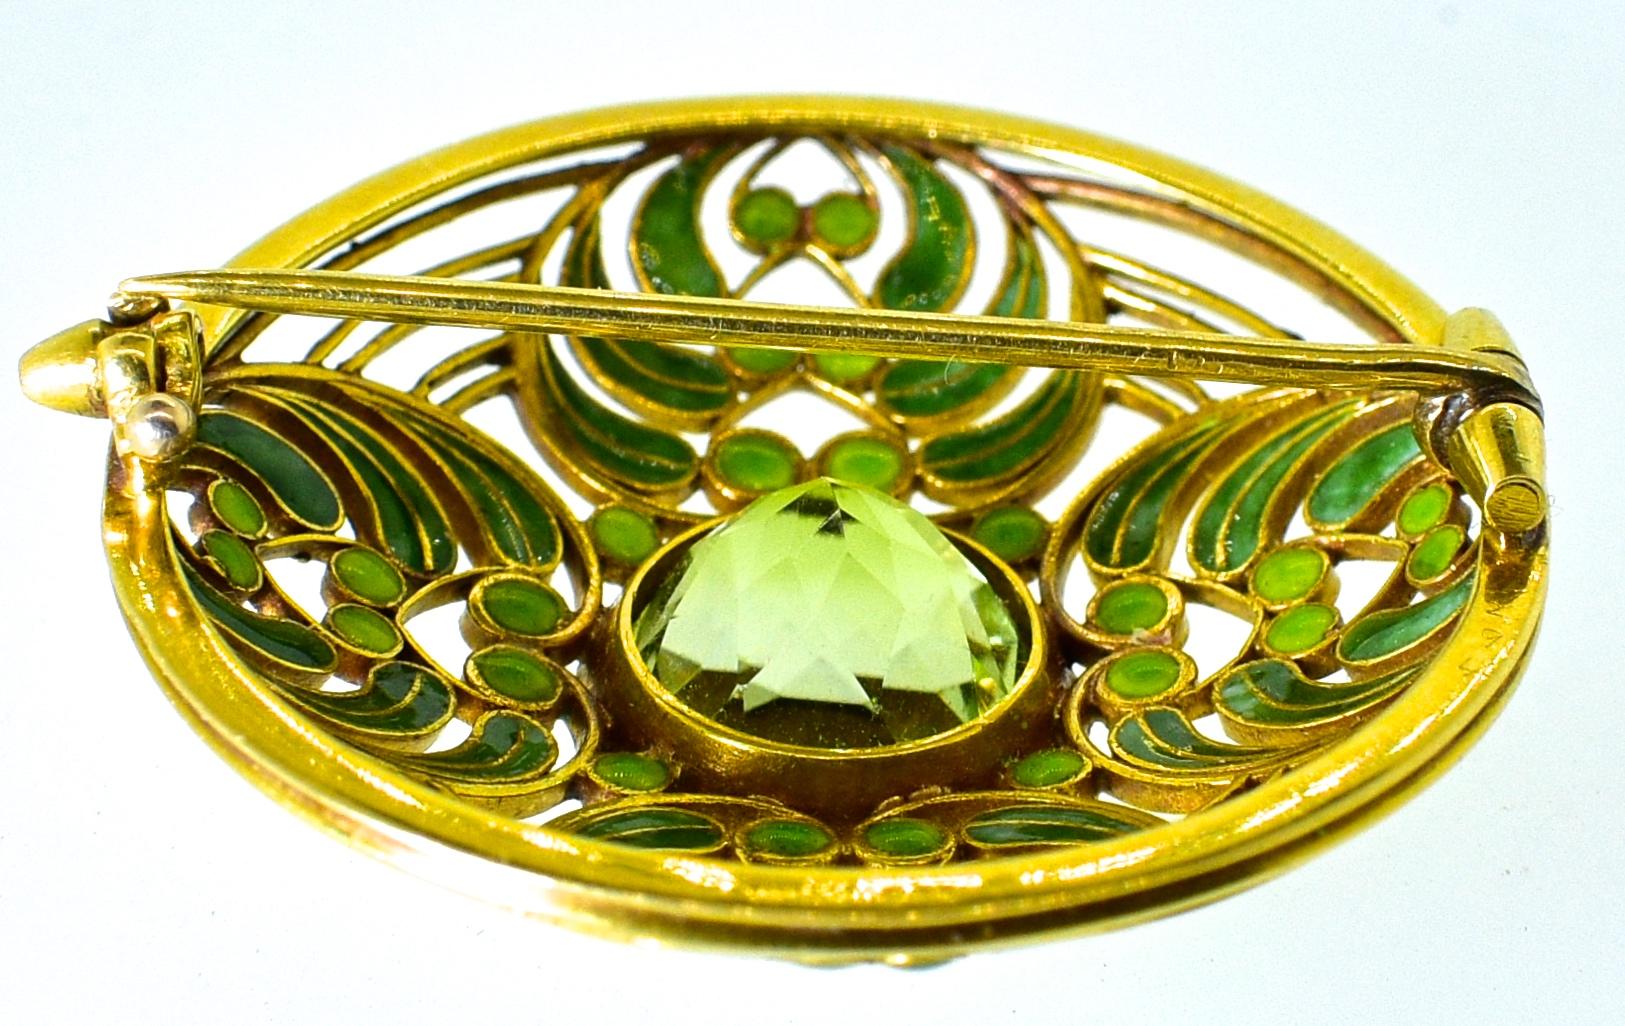 L.ouis Comfort Tiffany antique gold brooch decorated with plique a jour green enamel - and centering a round tourmaline weighing over 5 cts.  This 18K brooch is large and robust, signed Tiffany & Co., and is unquestionably a masterpiece by Louis